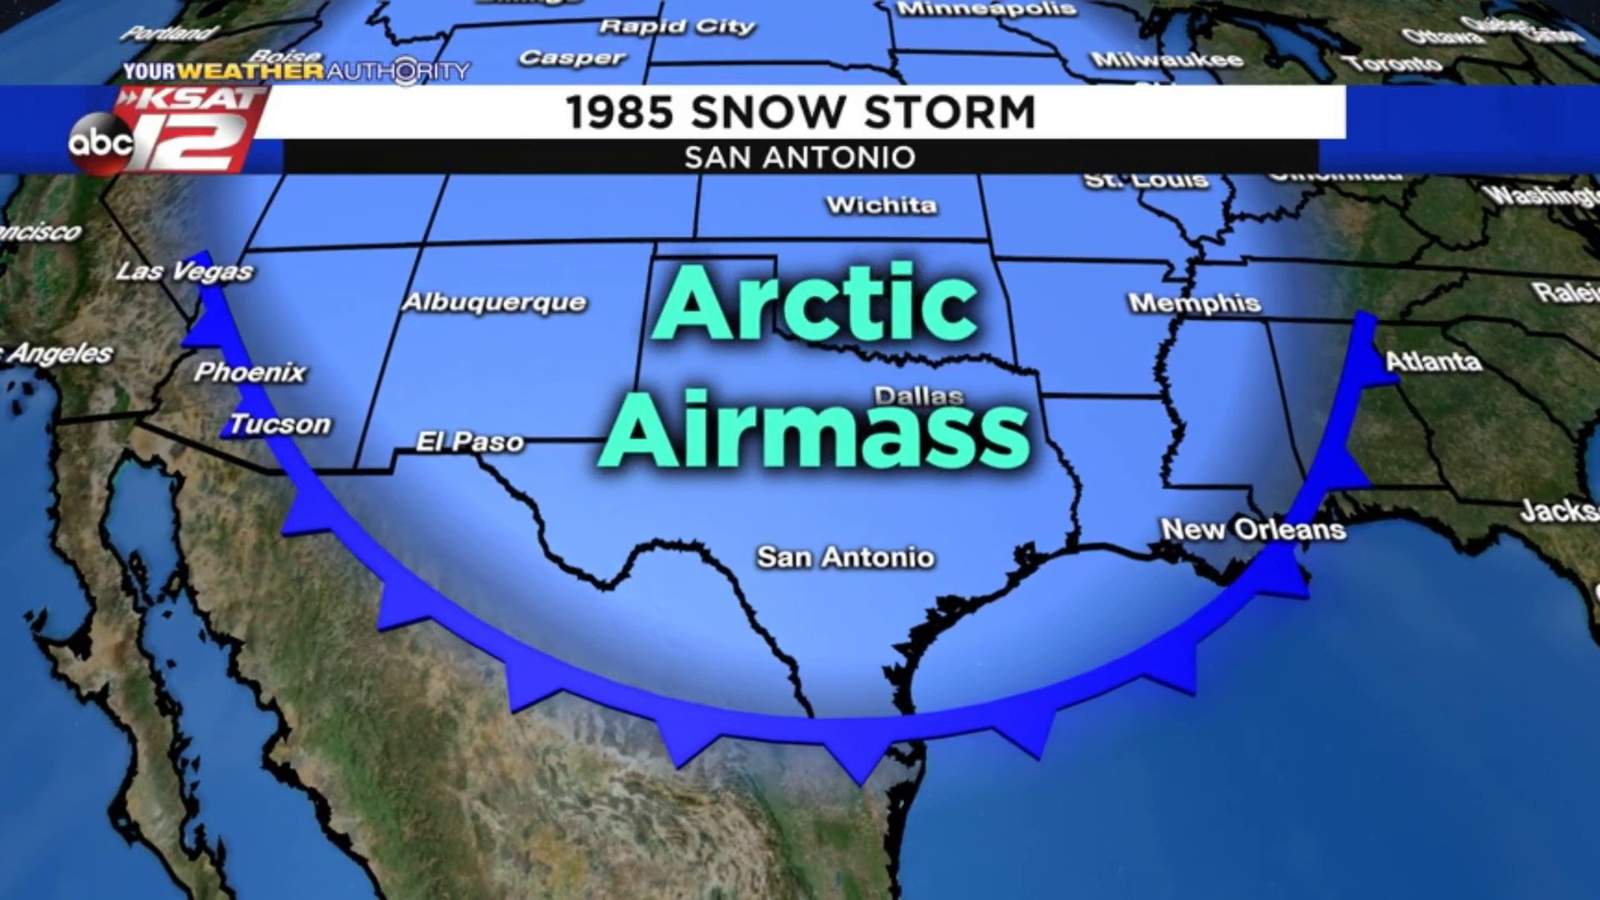 This Day in Weather History: January 12 is anniversary of San Antonio’s record setting 1985 snowstorm